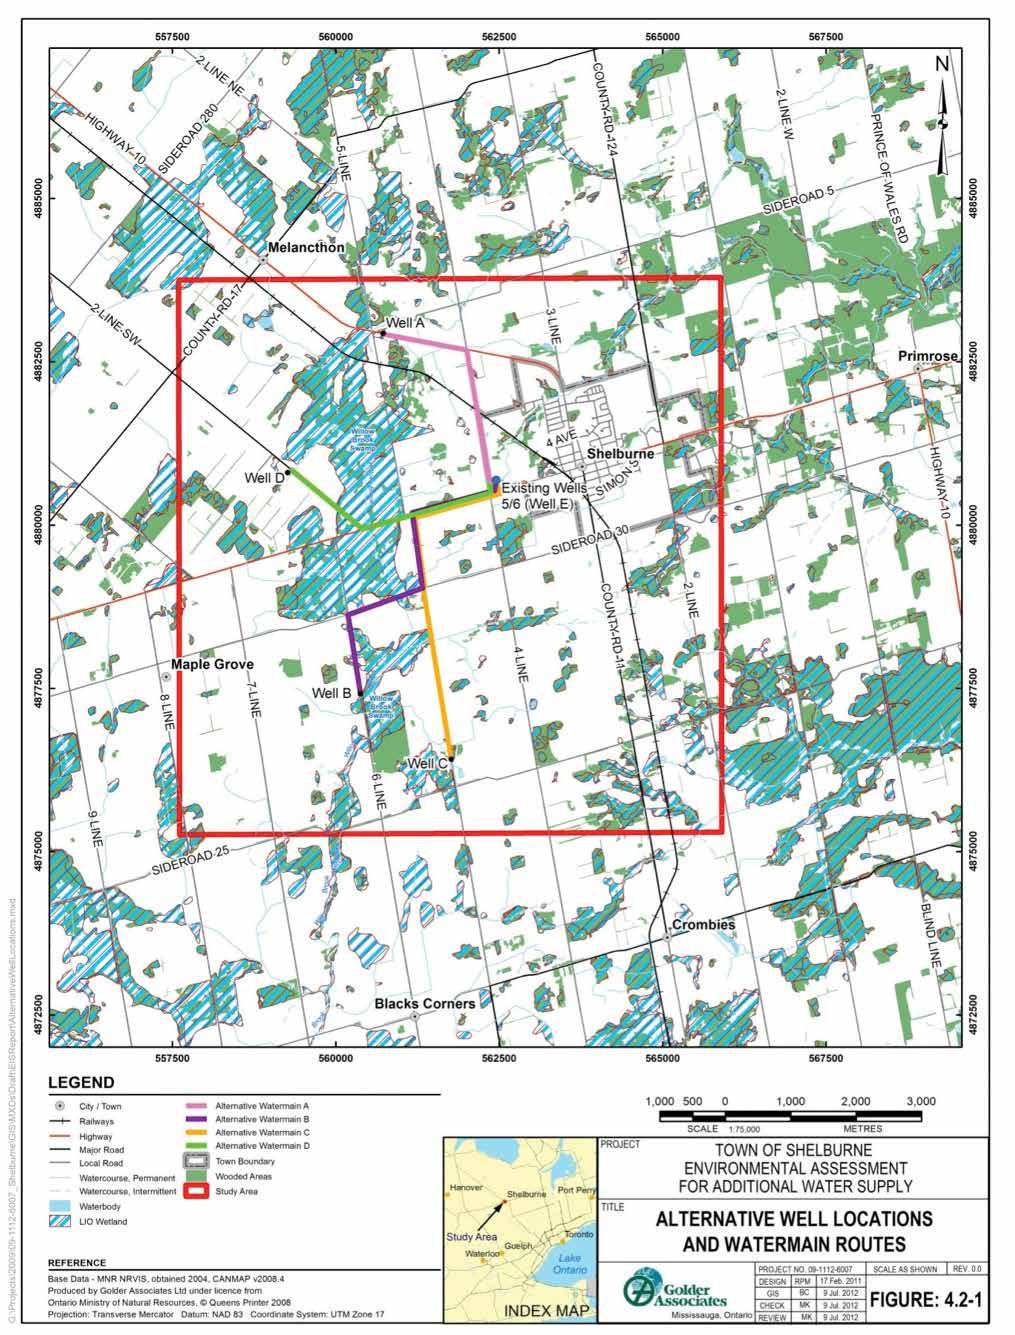 Figure 4-1: Alternative Well Locations and Water Main Routes Source: Golder and Associates.